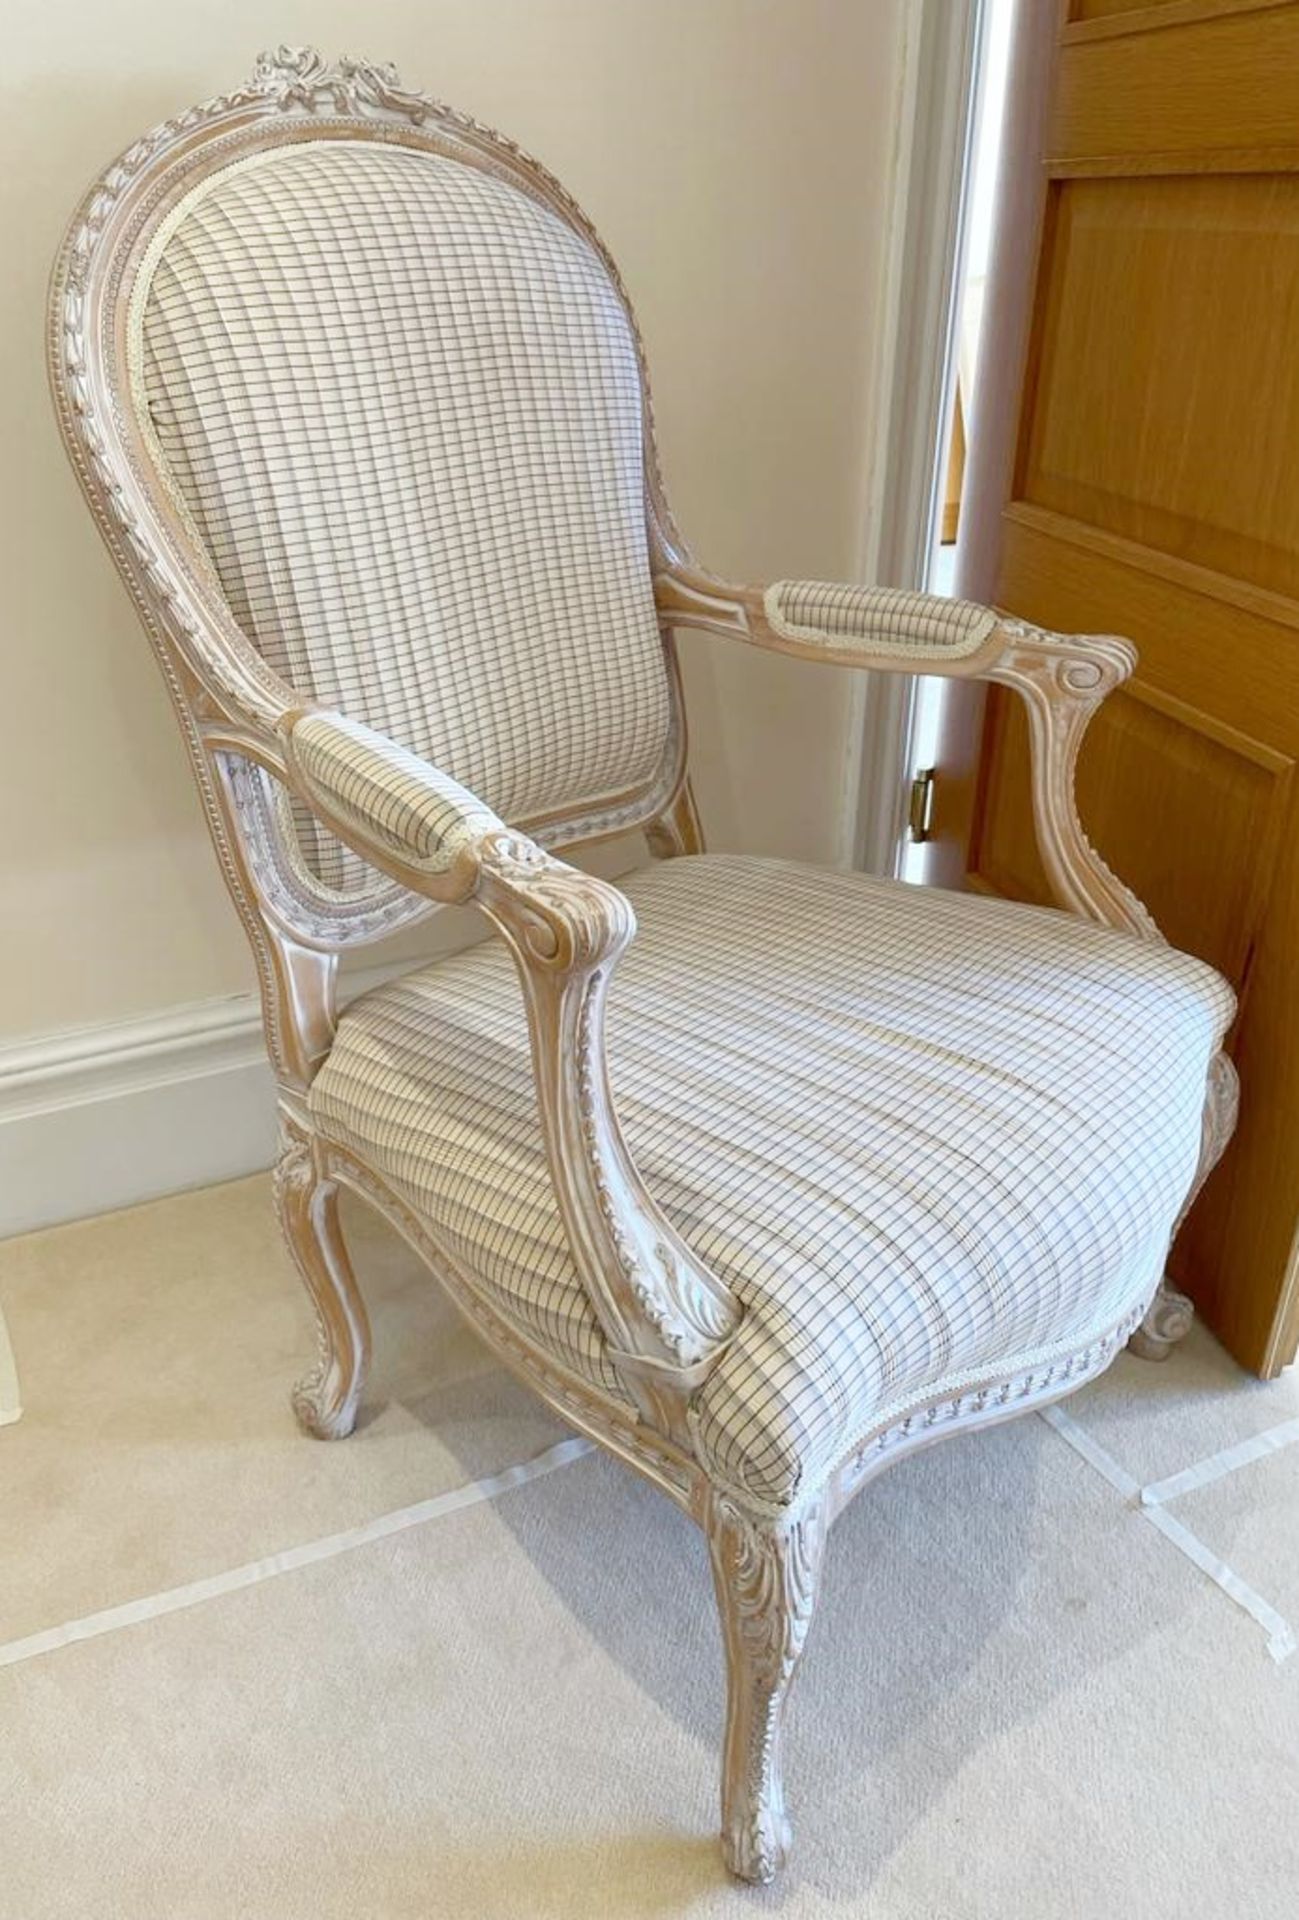 Pair of French Shabby Chic Bedroom Chairs - Stunning Carved Wood Chair Upholstered With Striped